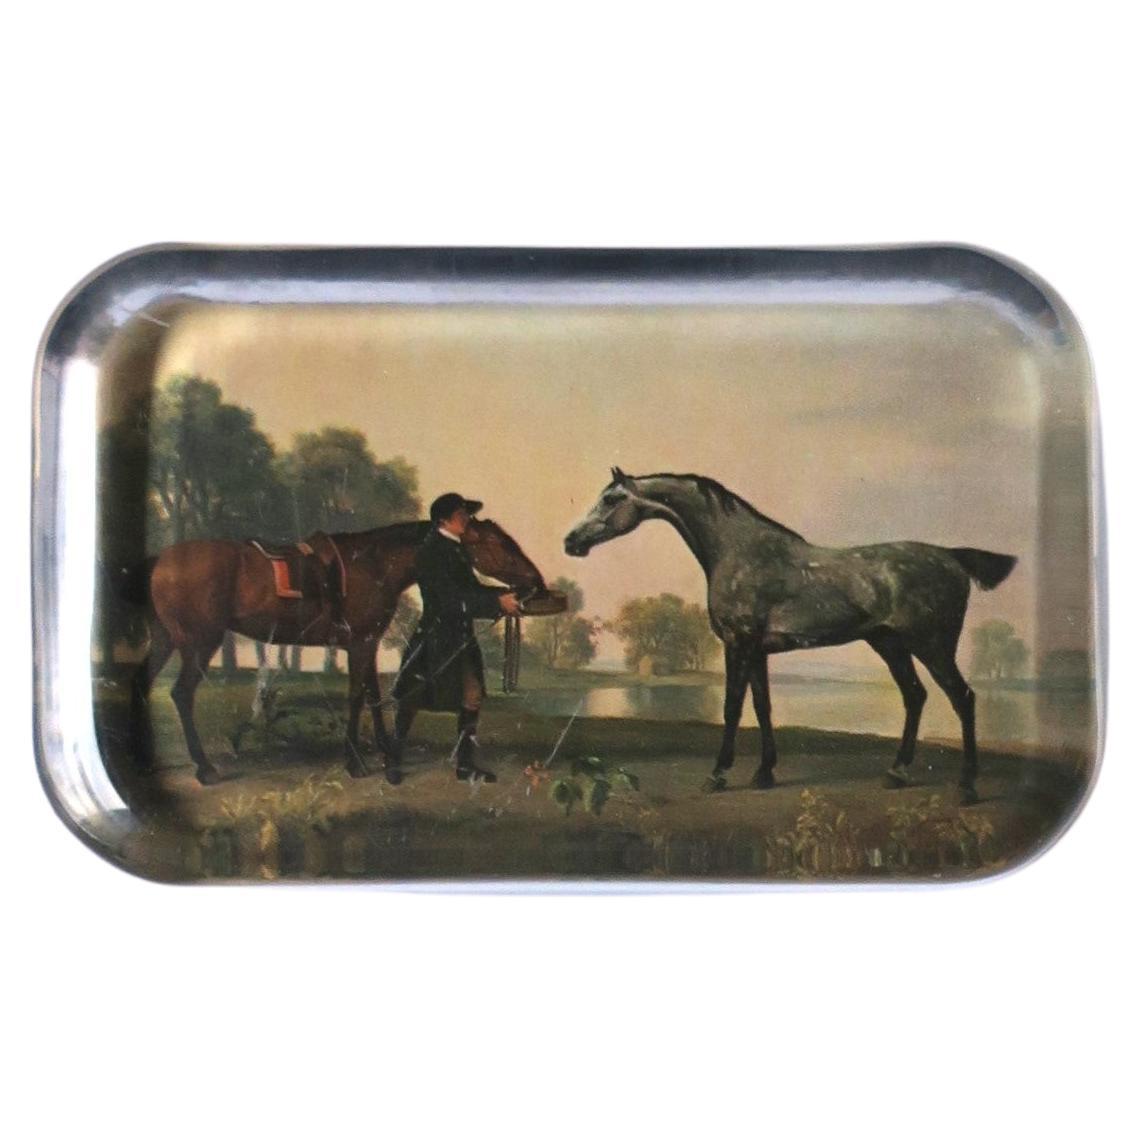 Country Scene with Horses Paper Decoupage Glass Paperweight, circa 1970s